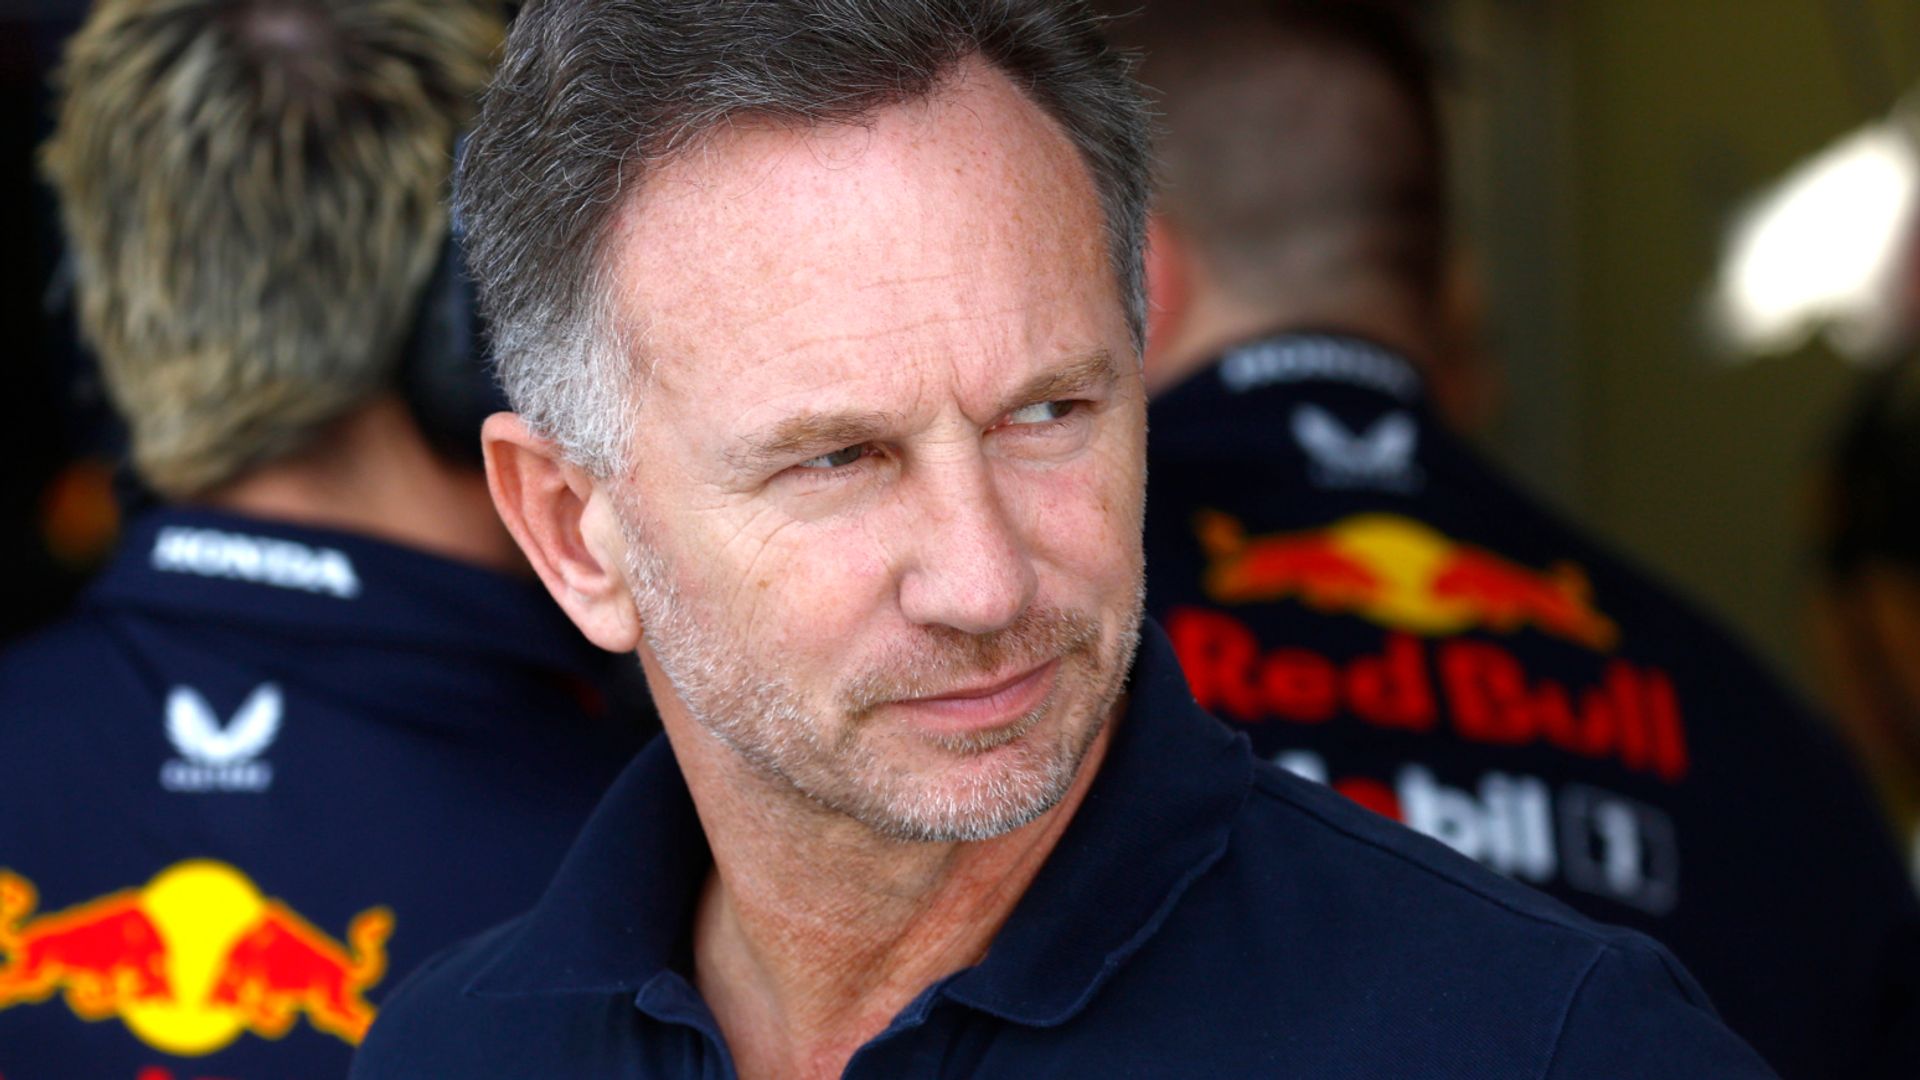 Woman who accused Horner appeals decision by Red Bull